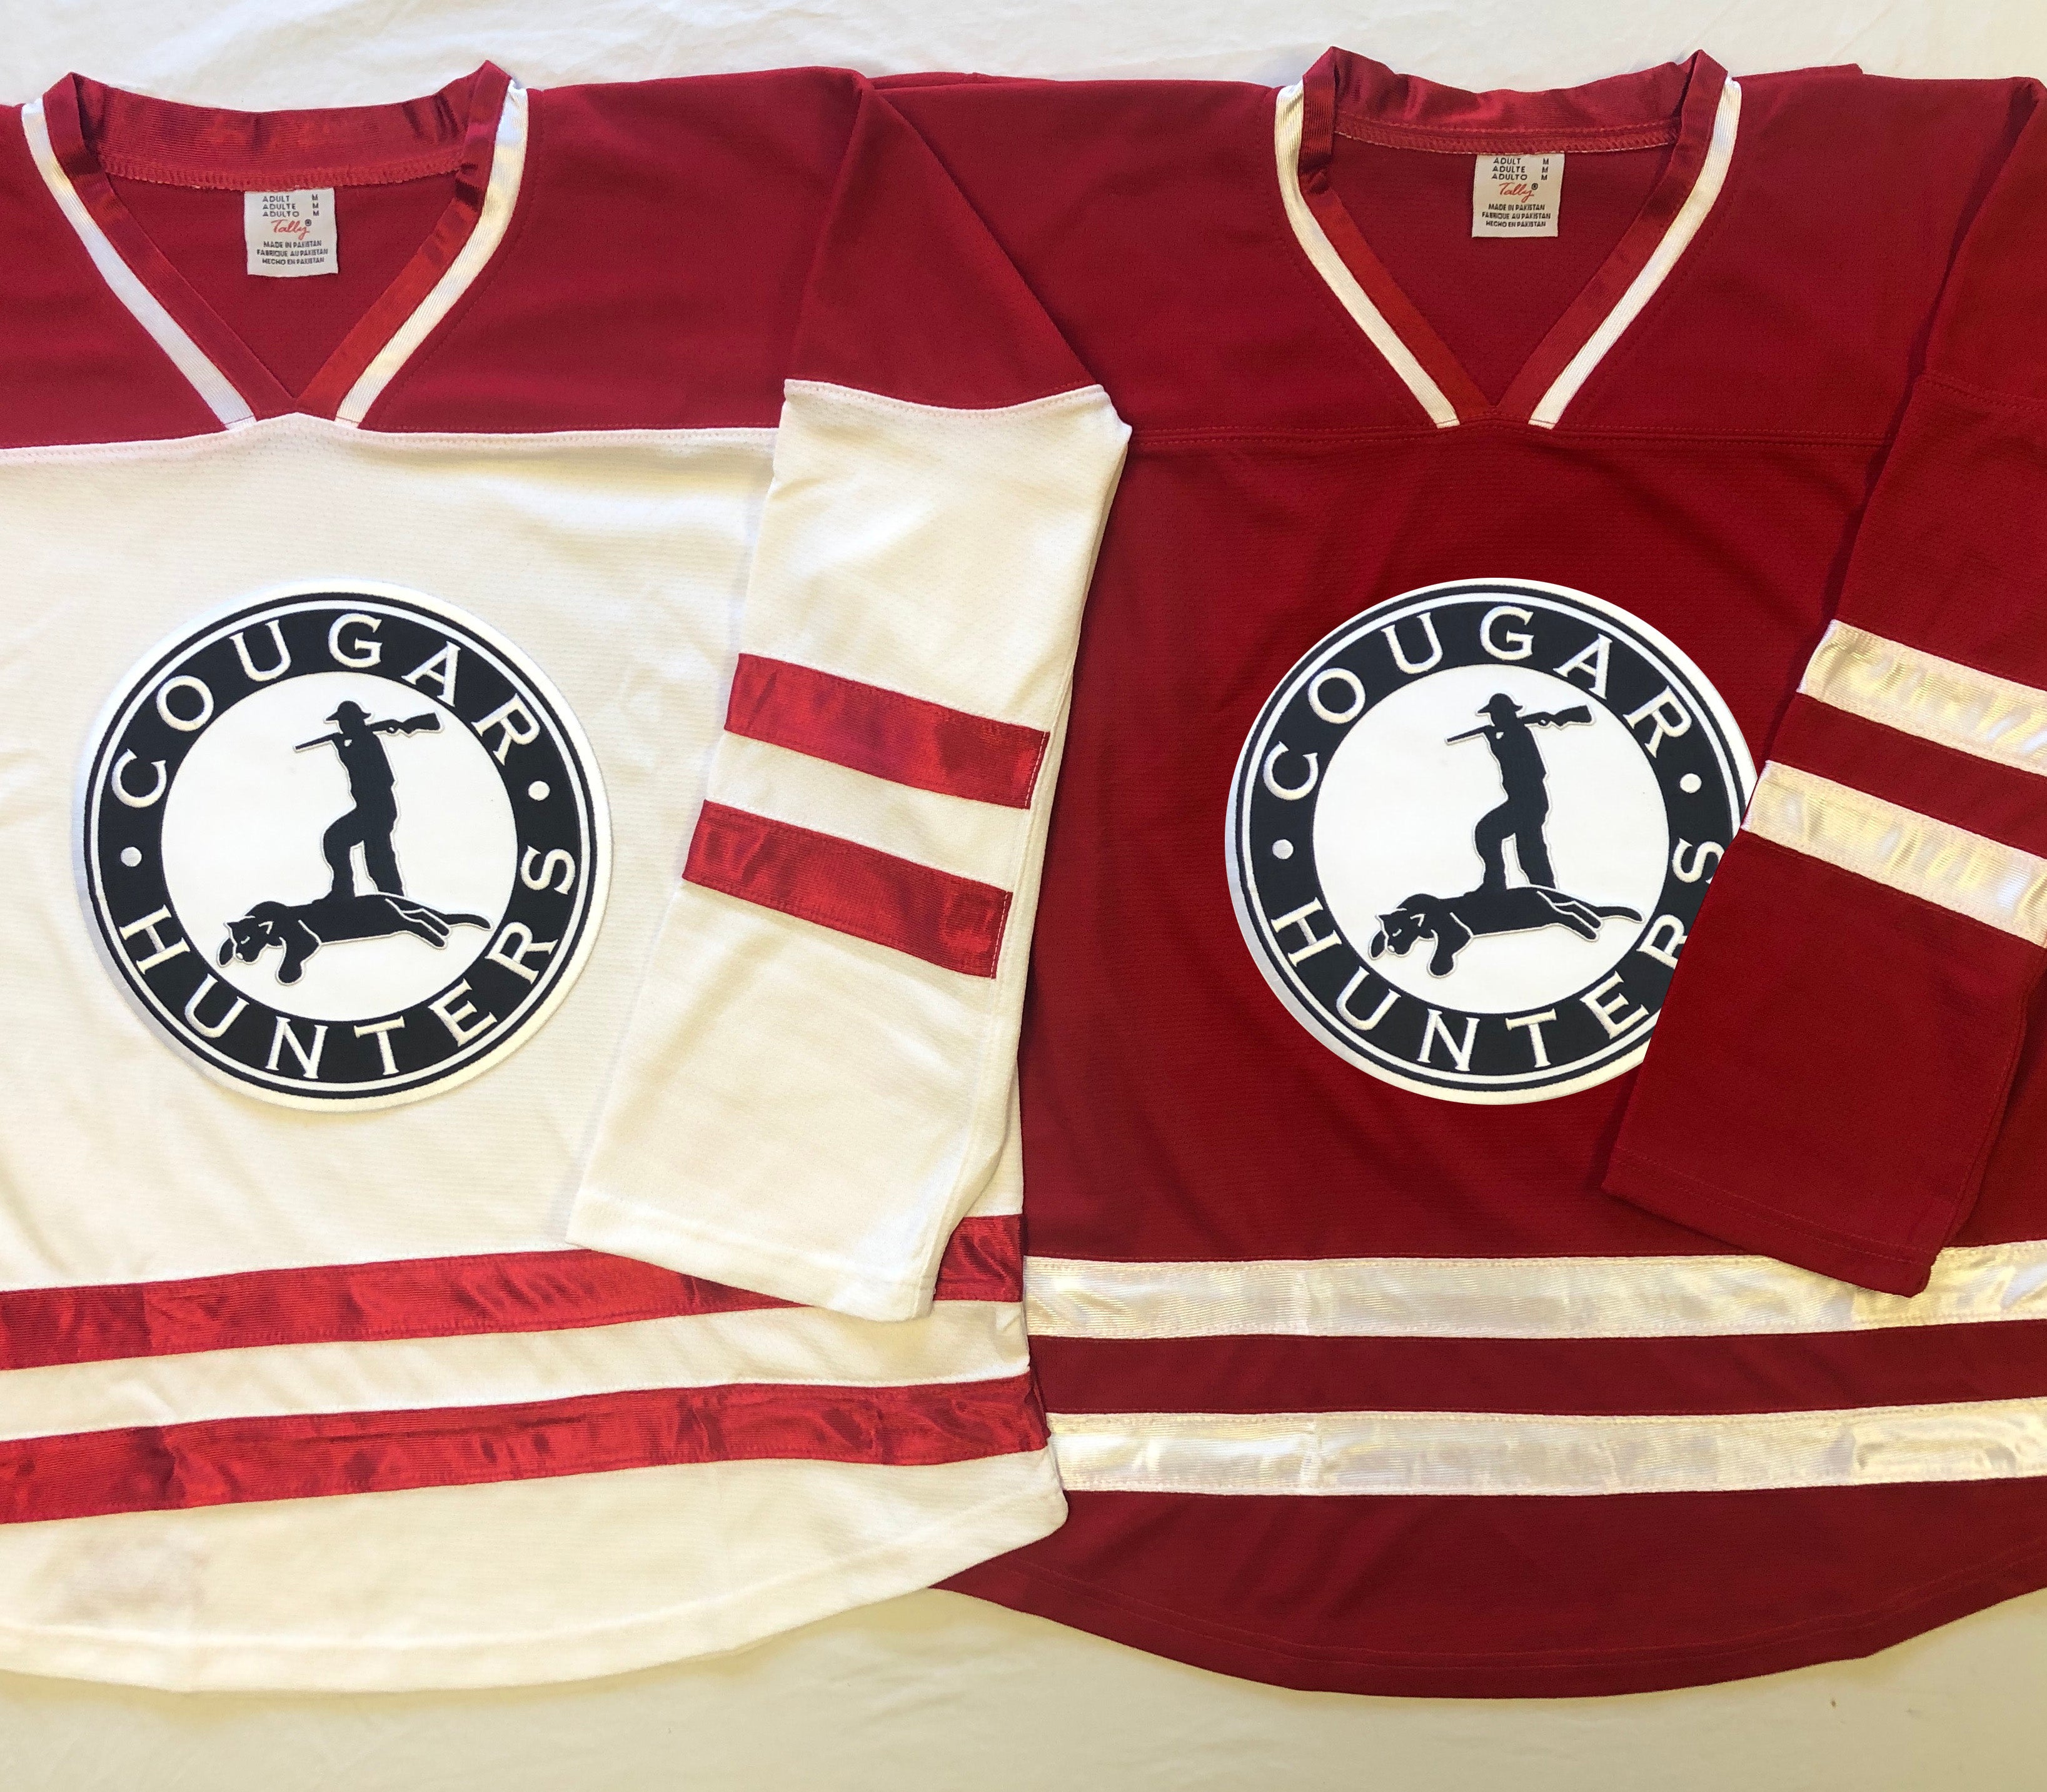 Custom Hockey Jerseys with The Cougar Hunters Twill Logo Adult XXL / (Number on Back and Sleeves) / Red